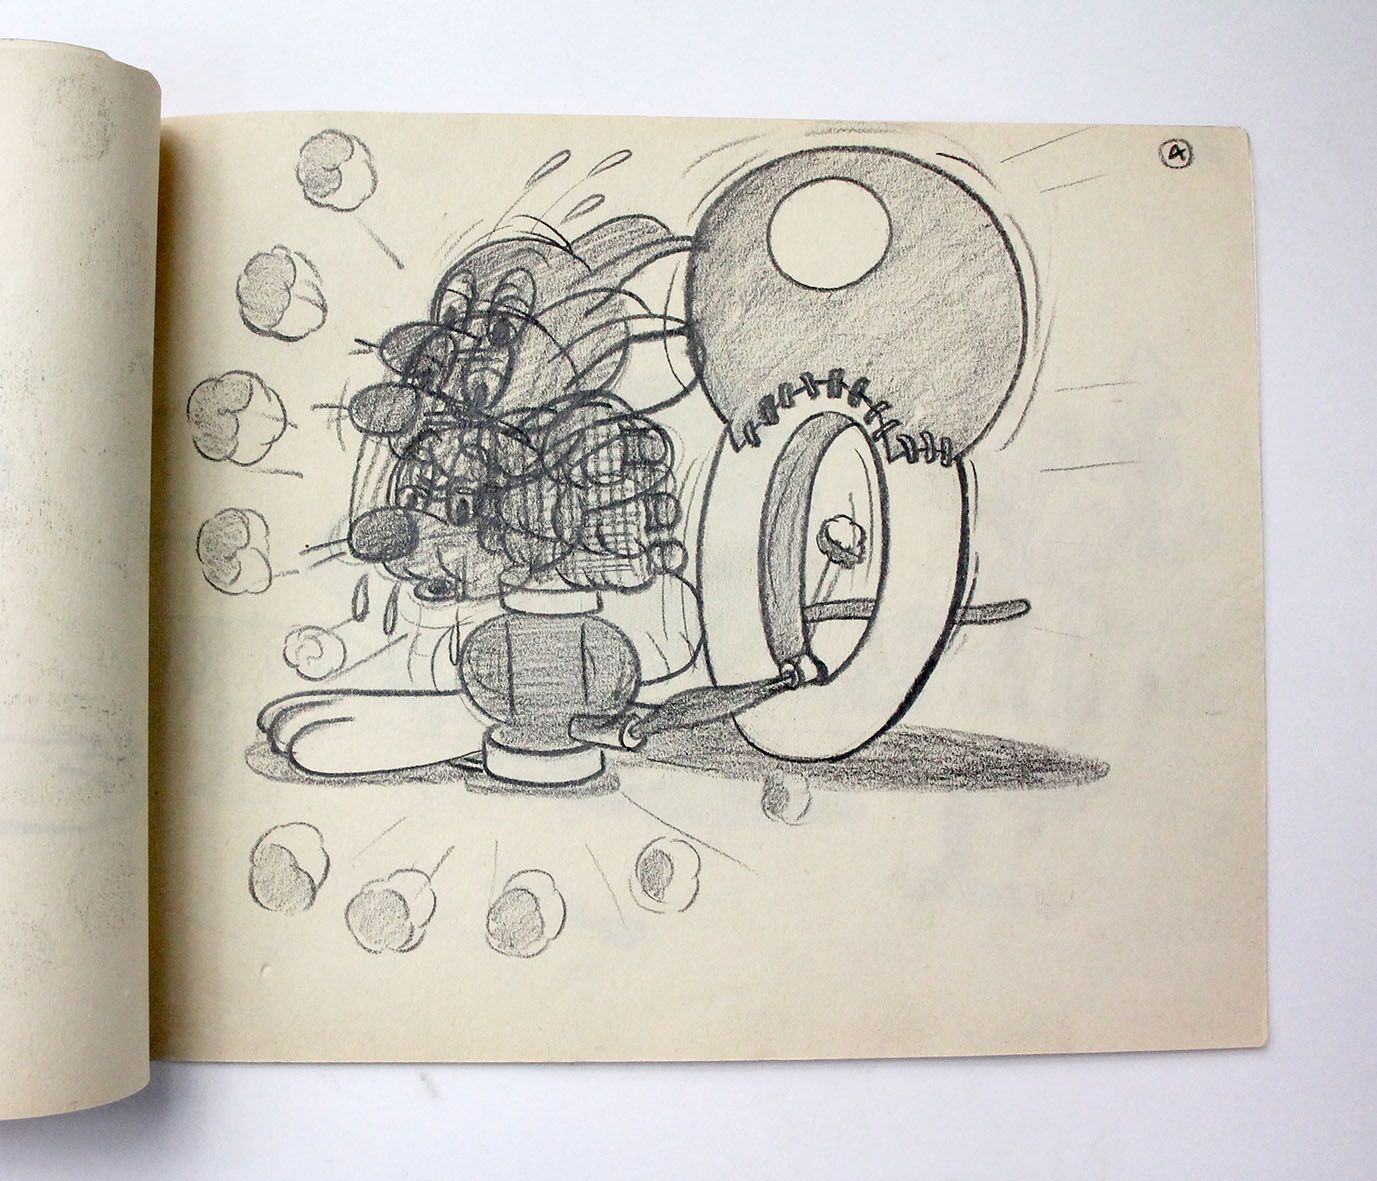 SHORT SEQUENCE OF ROUGH DRAWINGS, ILLUSTRATING A SMALL CHARACTER (IN THIS CASE, A MOUSE) INFLATING A TYRE, WITH DEVASTATING RESULTS. -  image 2